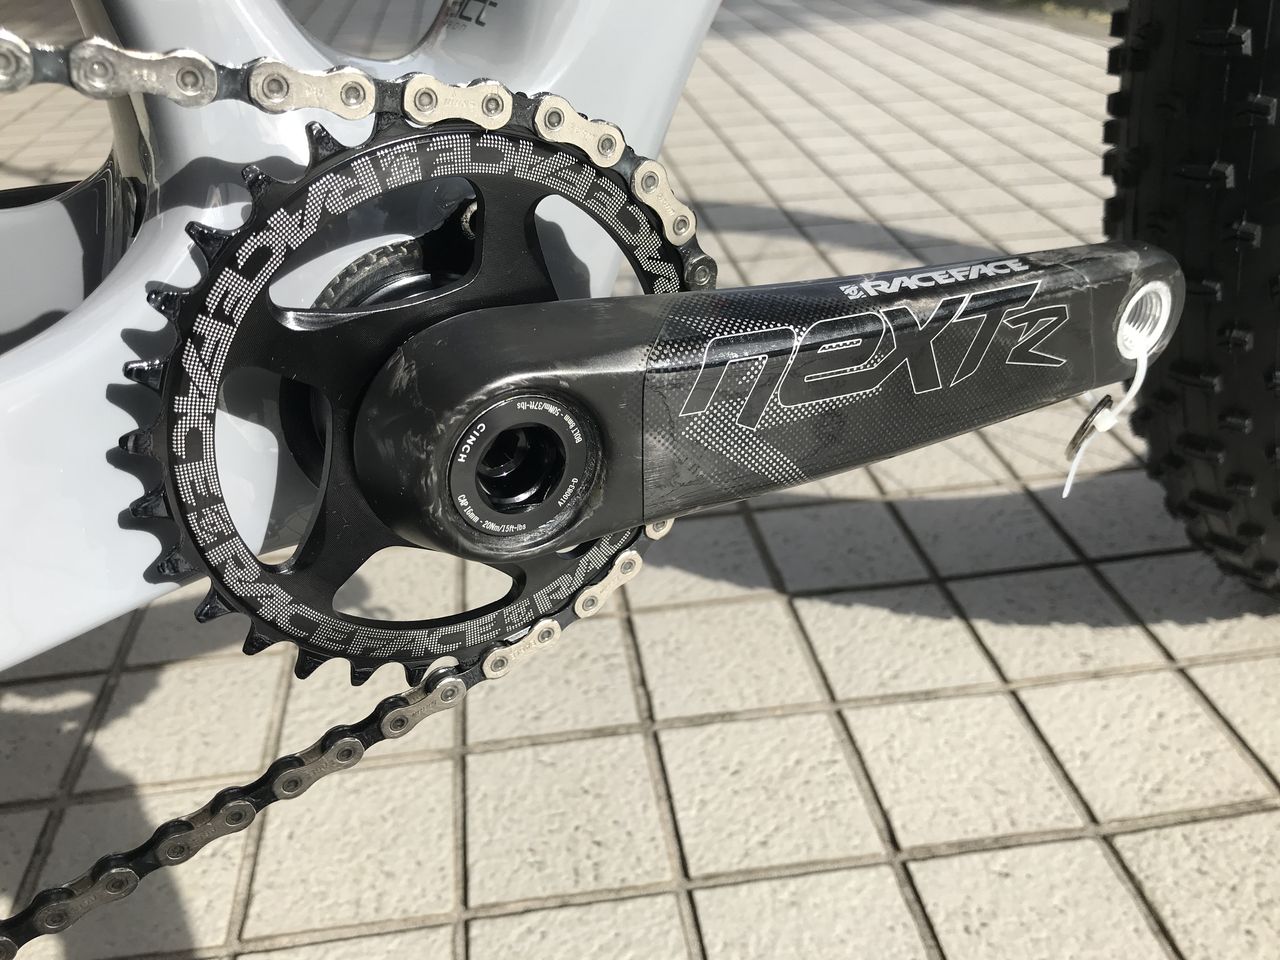 FATBIKE】SPECIALIZEDから2019年モデル「FATBOY COMP CARBON」が入荷